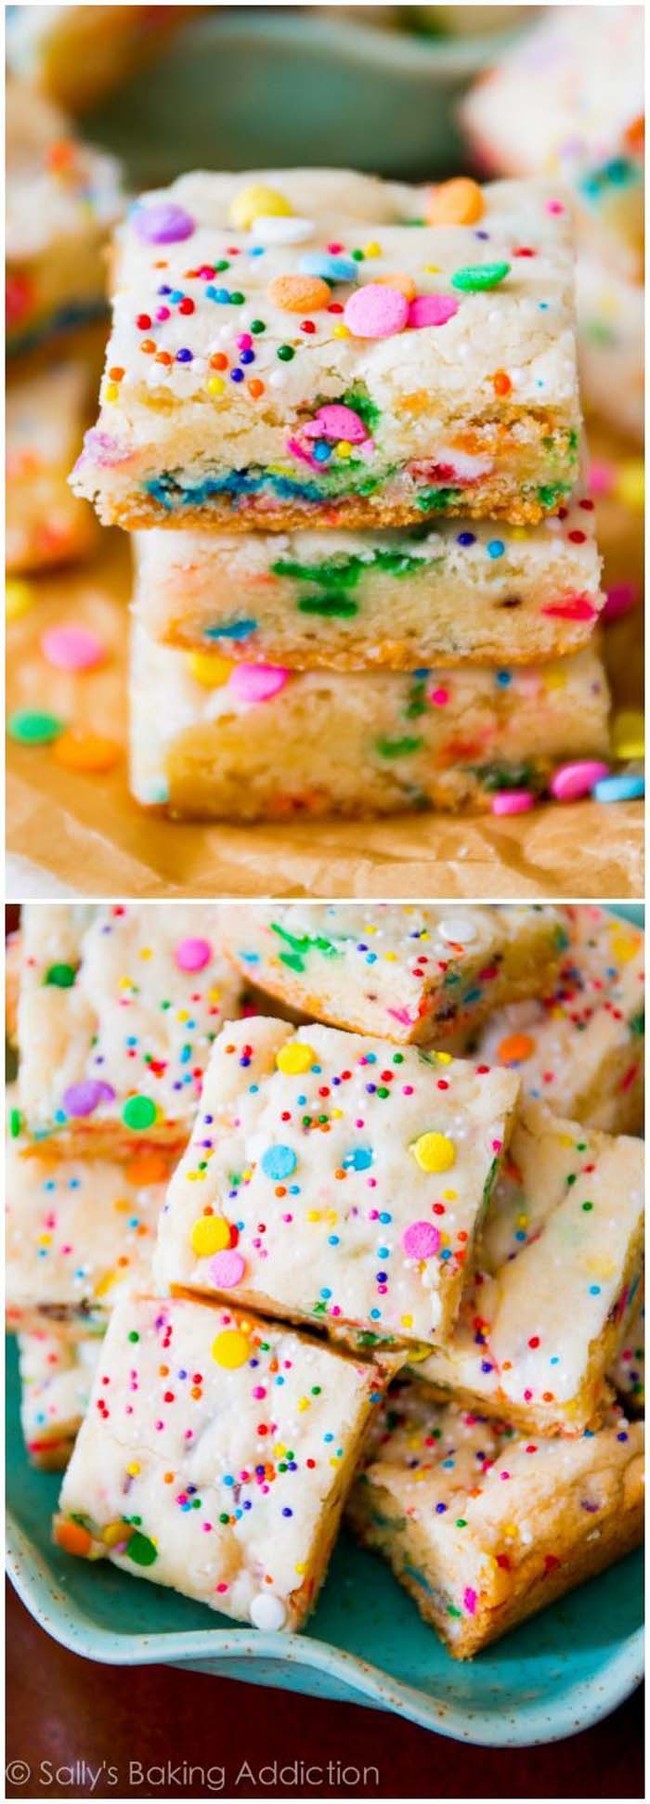 With white chocolate chips and cake mix, <a href="http://sallysbakingaddiction.com/2012/04/06/take-2-funfetti-cake-batter-blondies/" target="_blank">this recipe</a> is deliciously decadent.